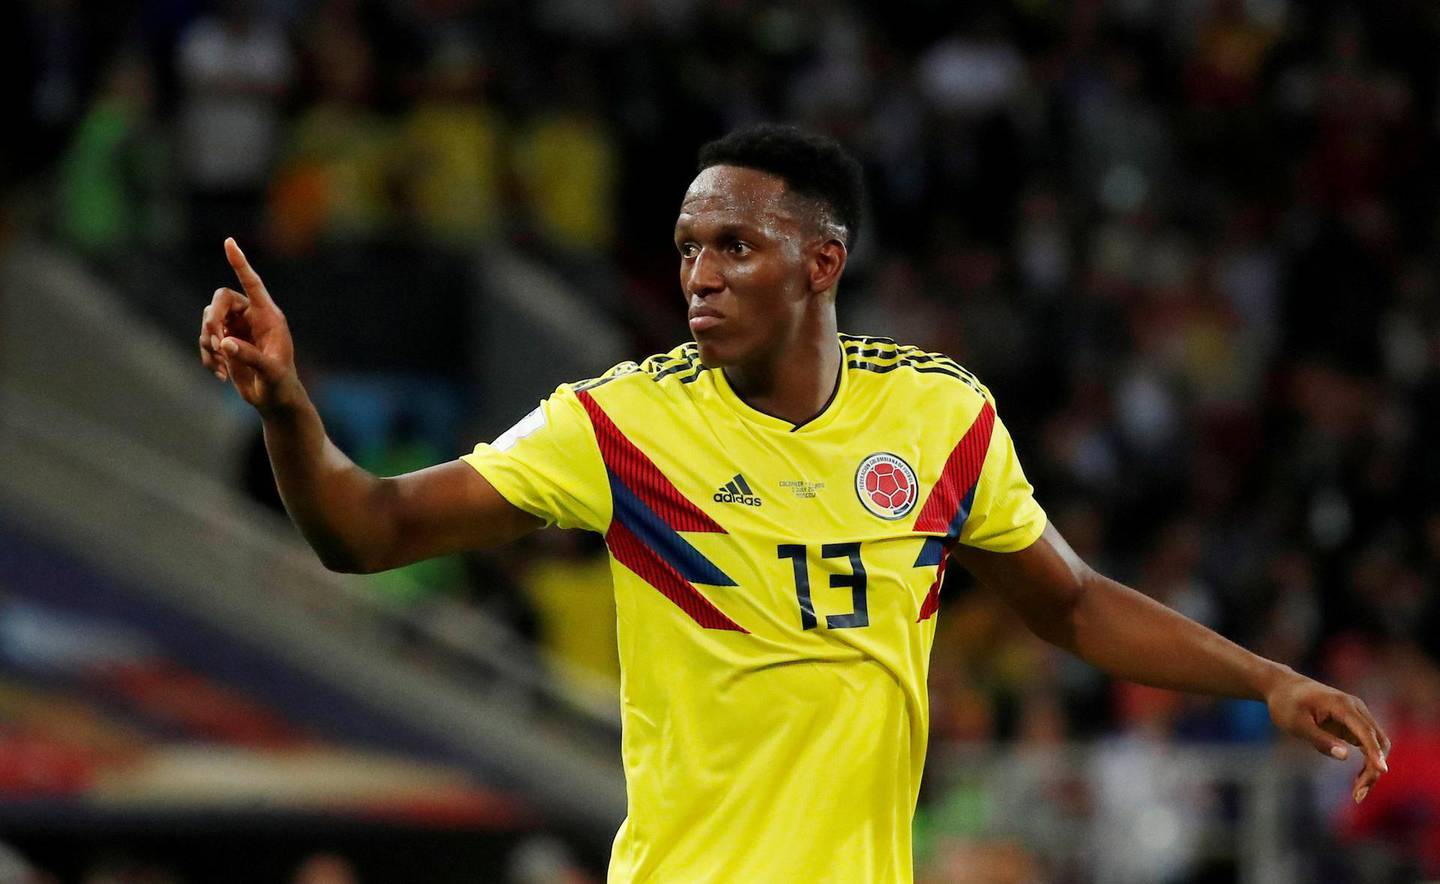 FILE PHOTO: Colombia's Yerry Mina reacts during World Cup match against England at Spartak Stadium, Moscow, Russia - July 3, 2018.  REUTERS/Maxim Shemetov/File Photo